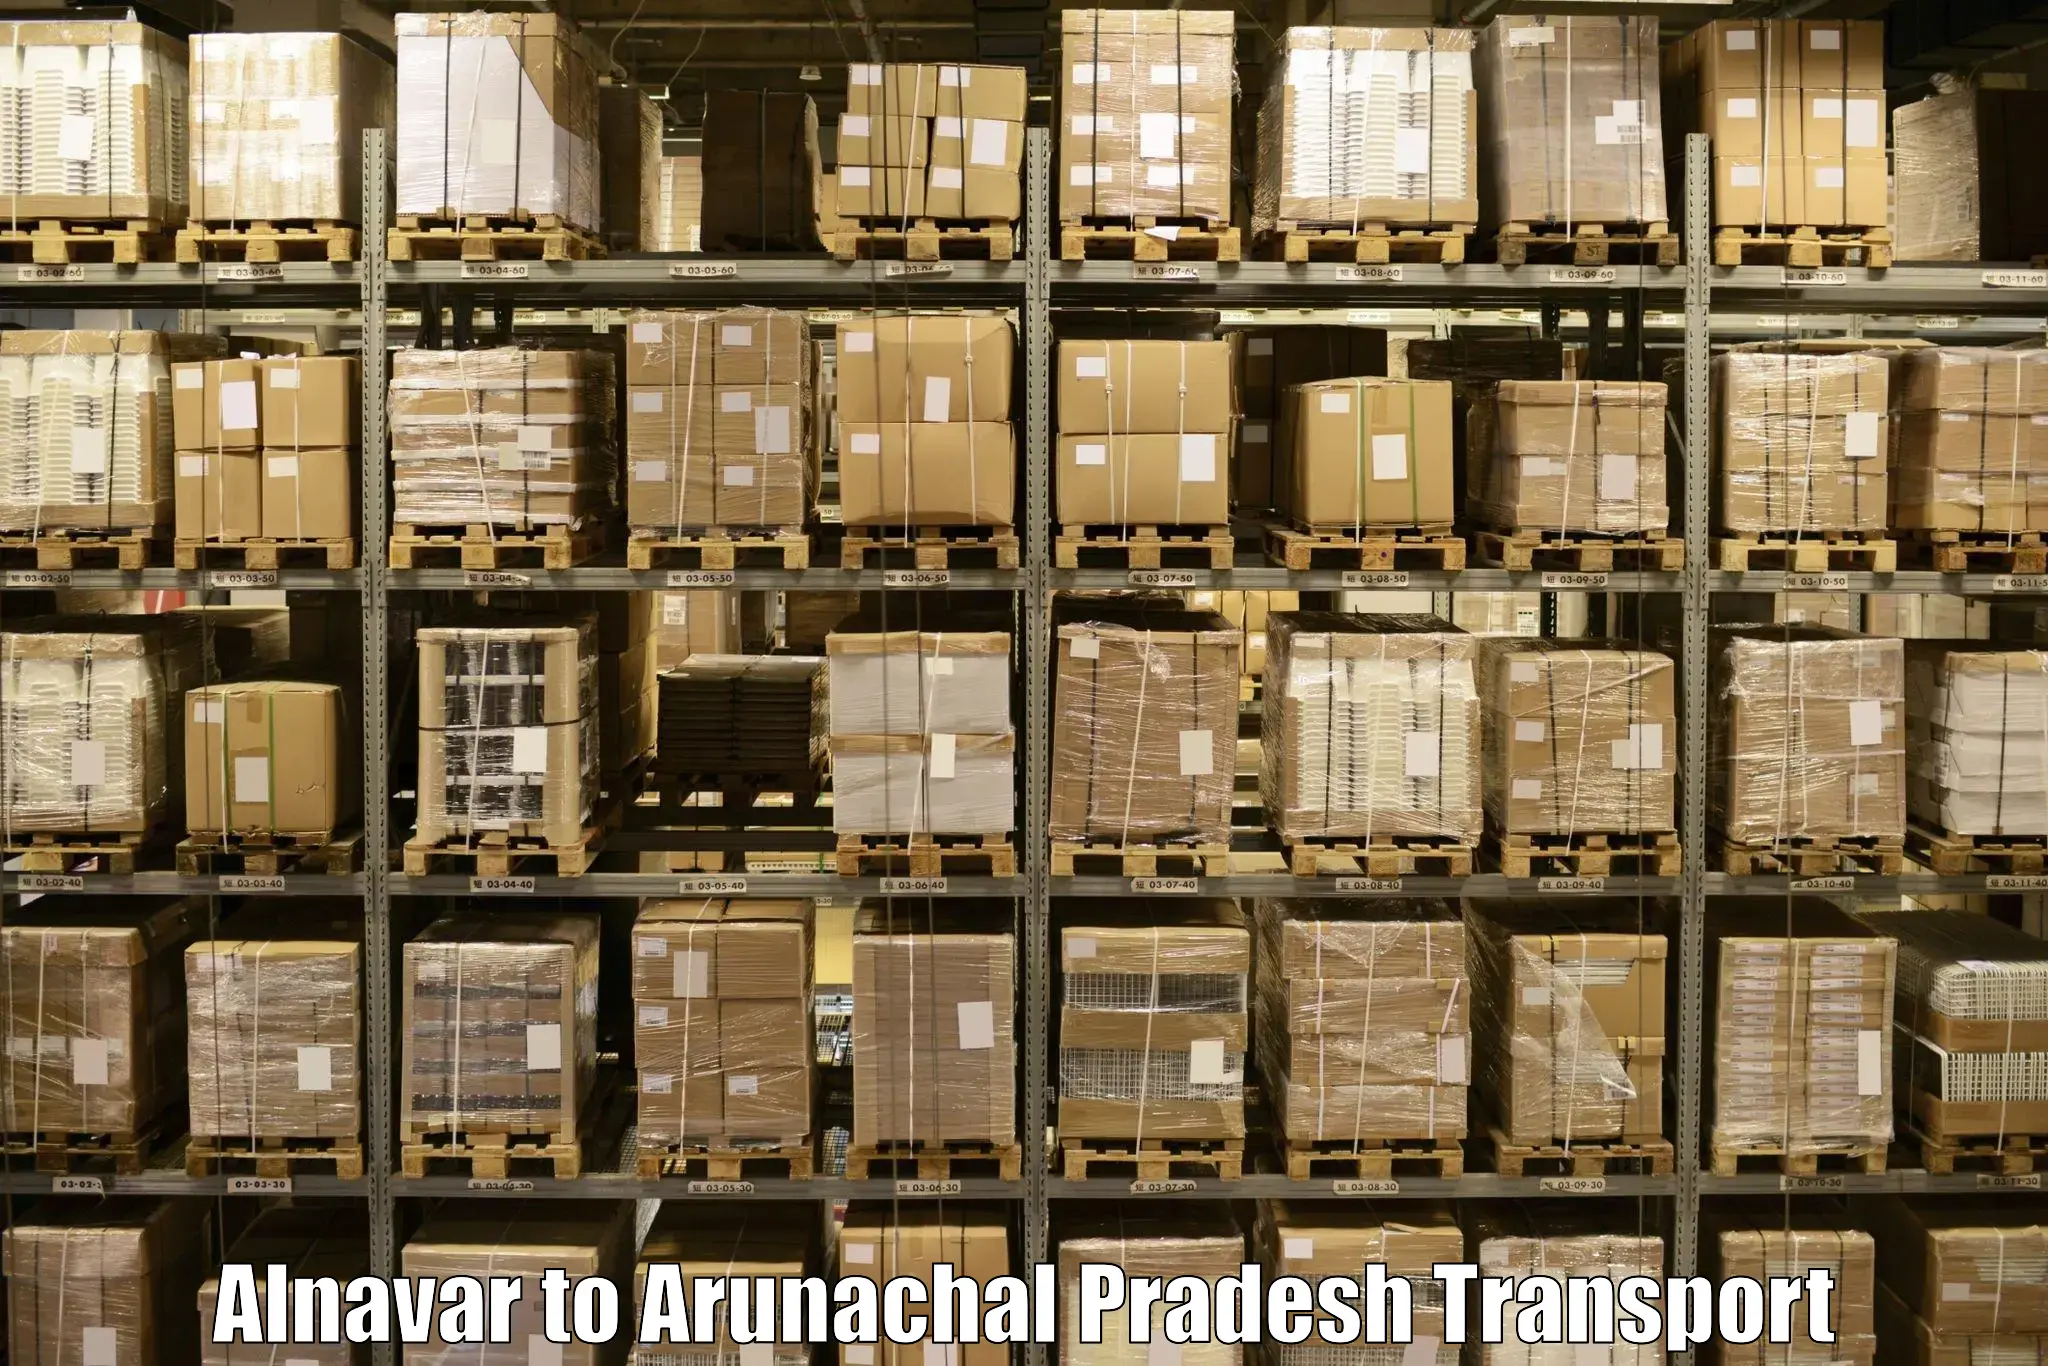 Truck transport companies in India Alnavar to Dibang Valley